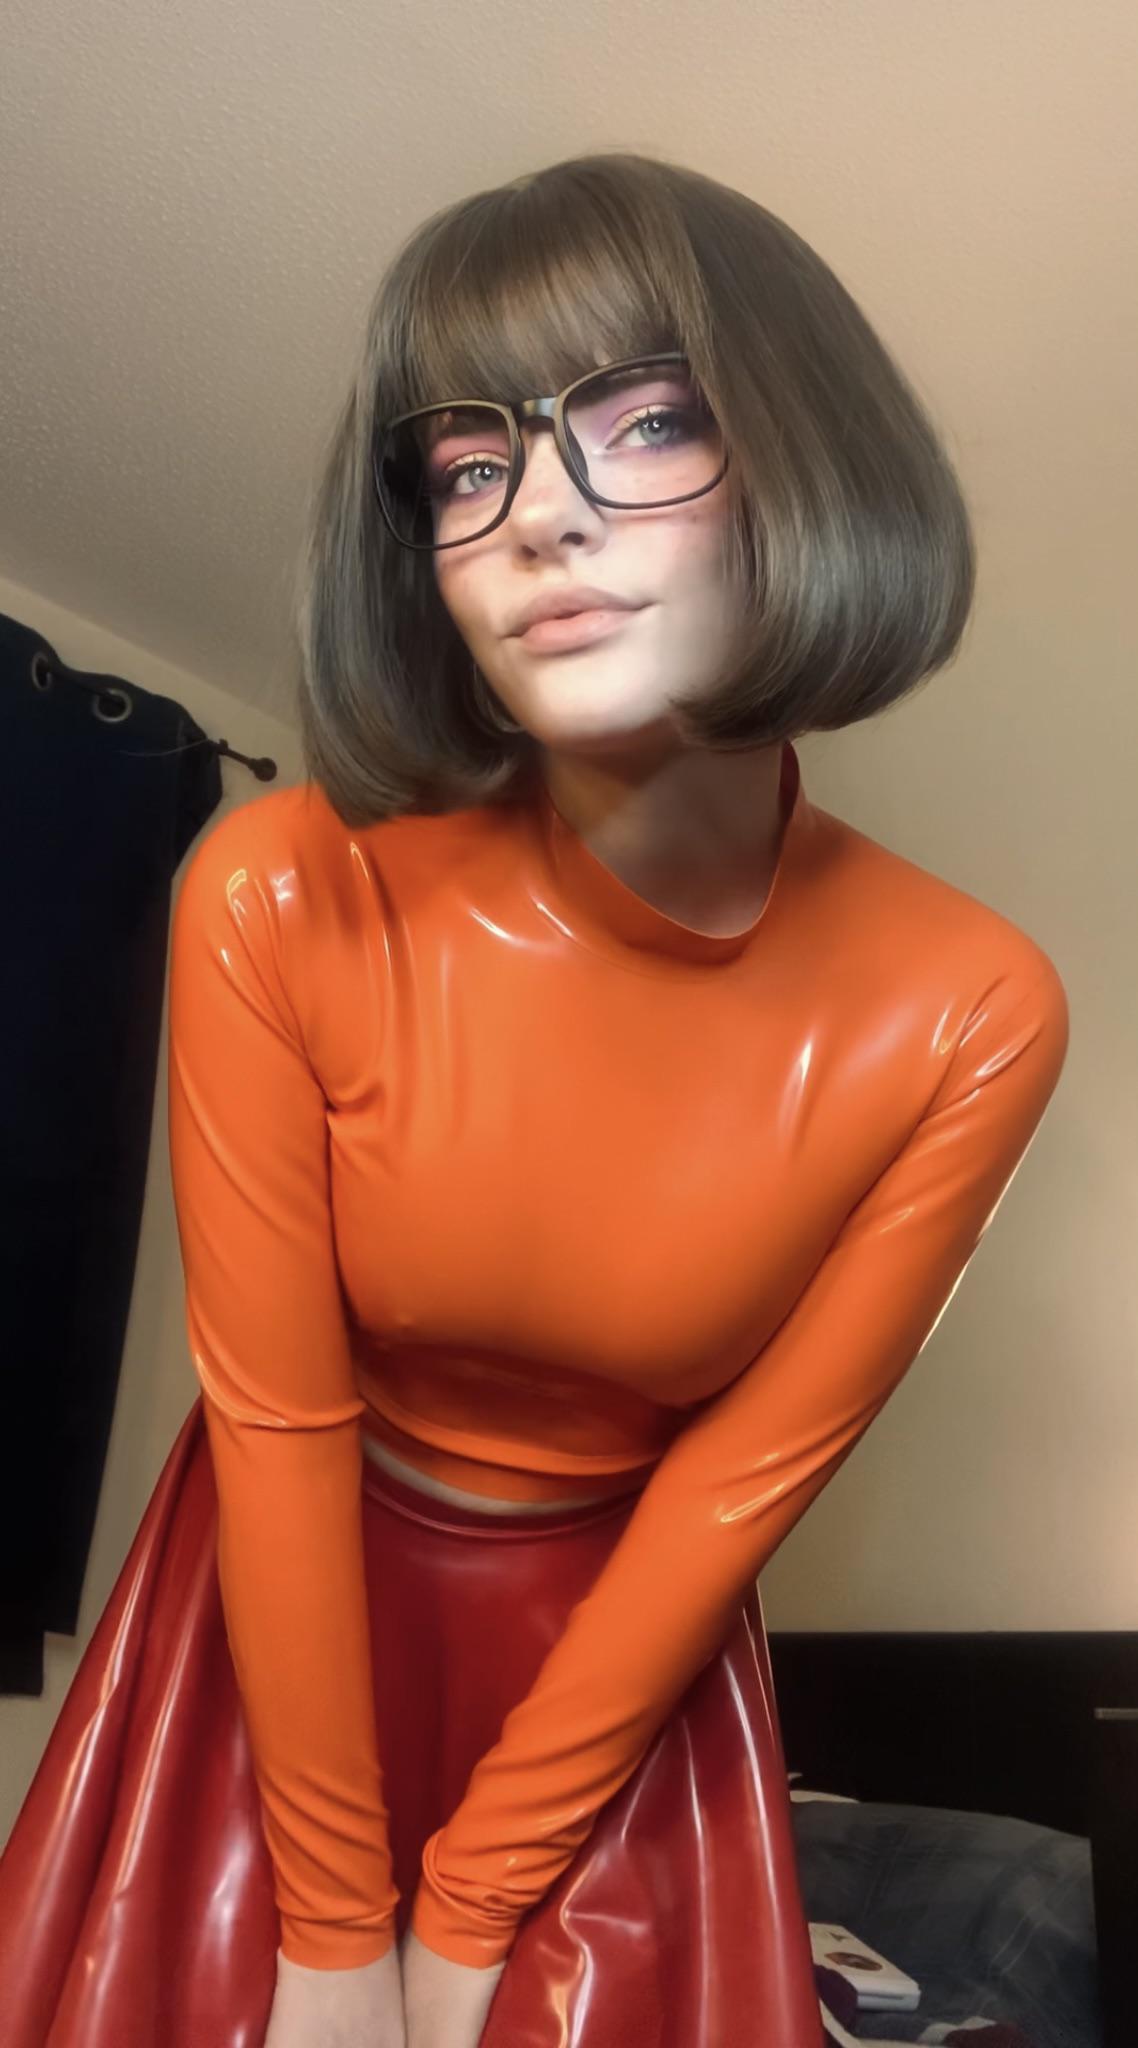 Scooby Doo Latex - View Some more of my latex velma cosplay from Scooby doo ðŸ§¡ for free |  Simply-Cosplay